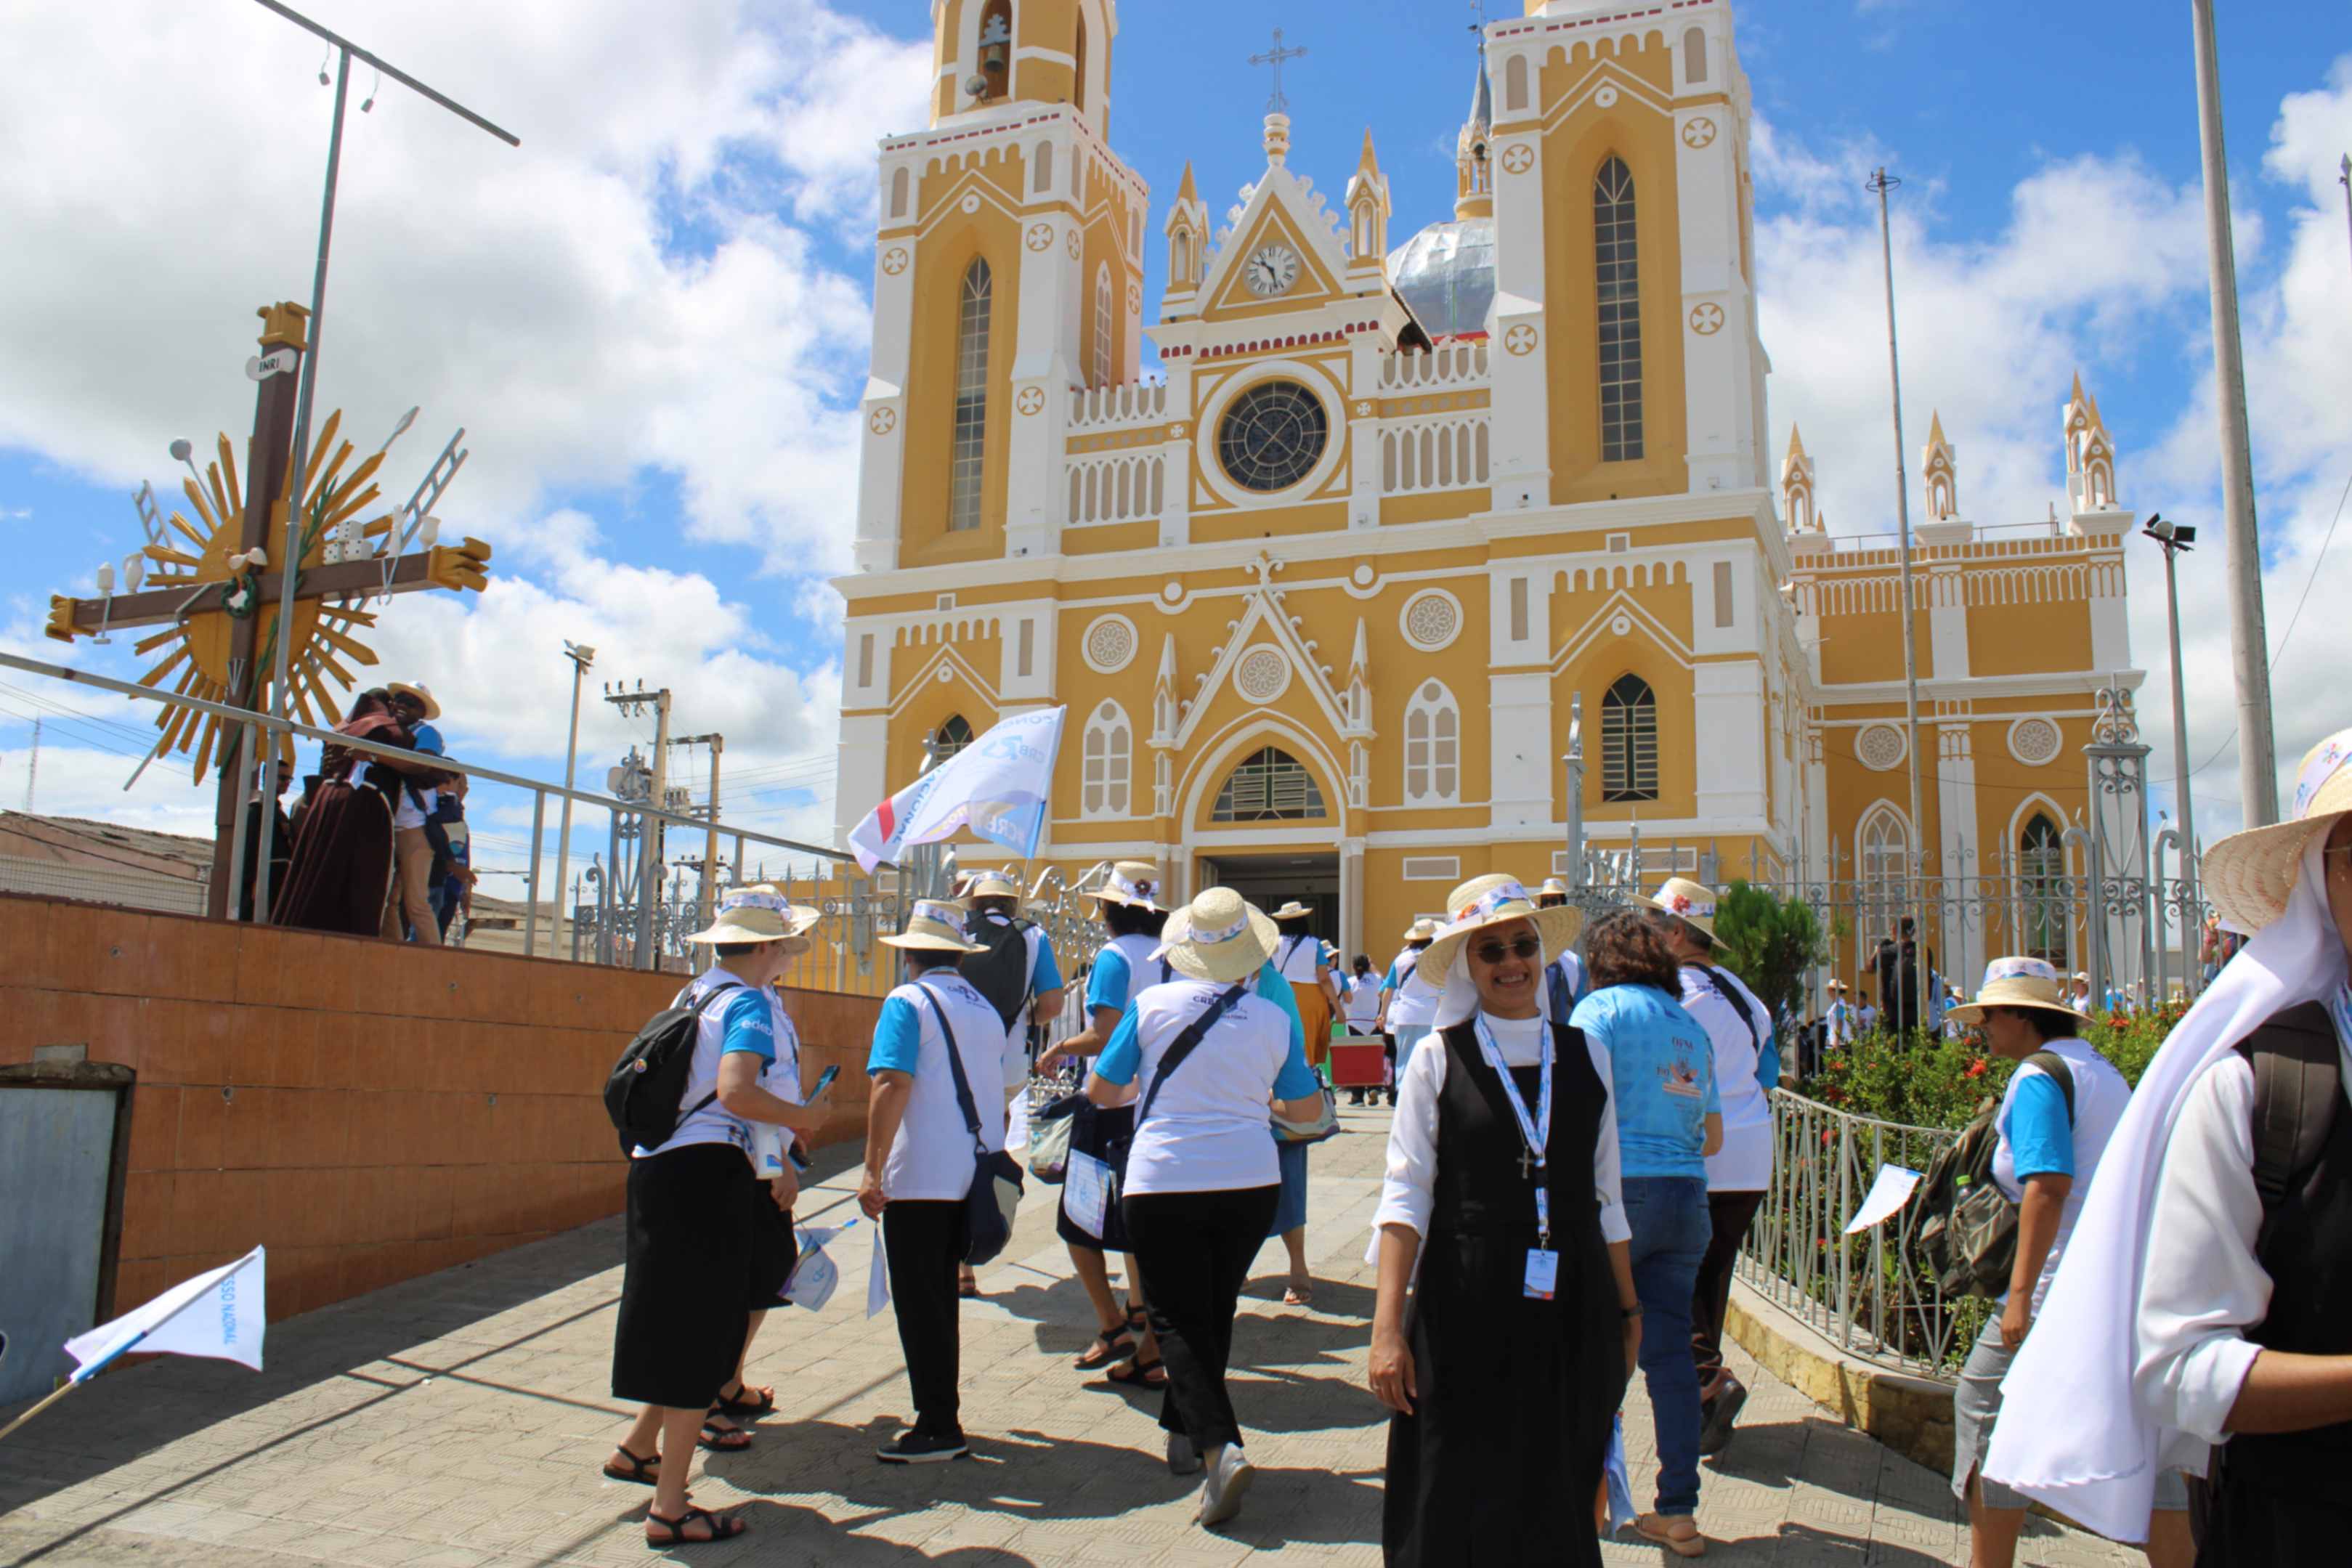 Participants celebrating the 70th anniversary of the Conference of Religious in Brazil take a day to make a pilgrimage to the Sanctuary St. Francis of the Stigmata in Caninde, Ceara. (Courtesy of CRB)